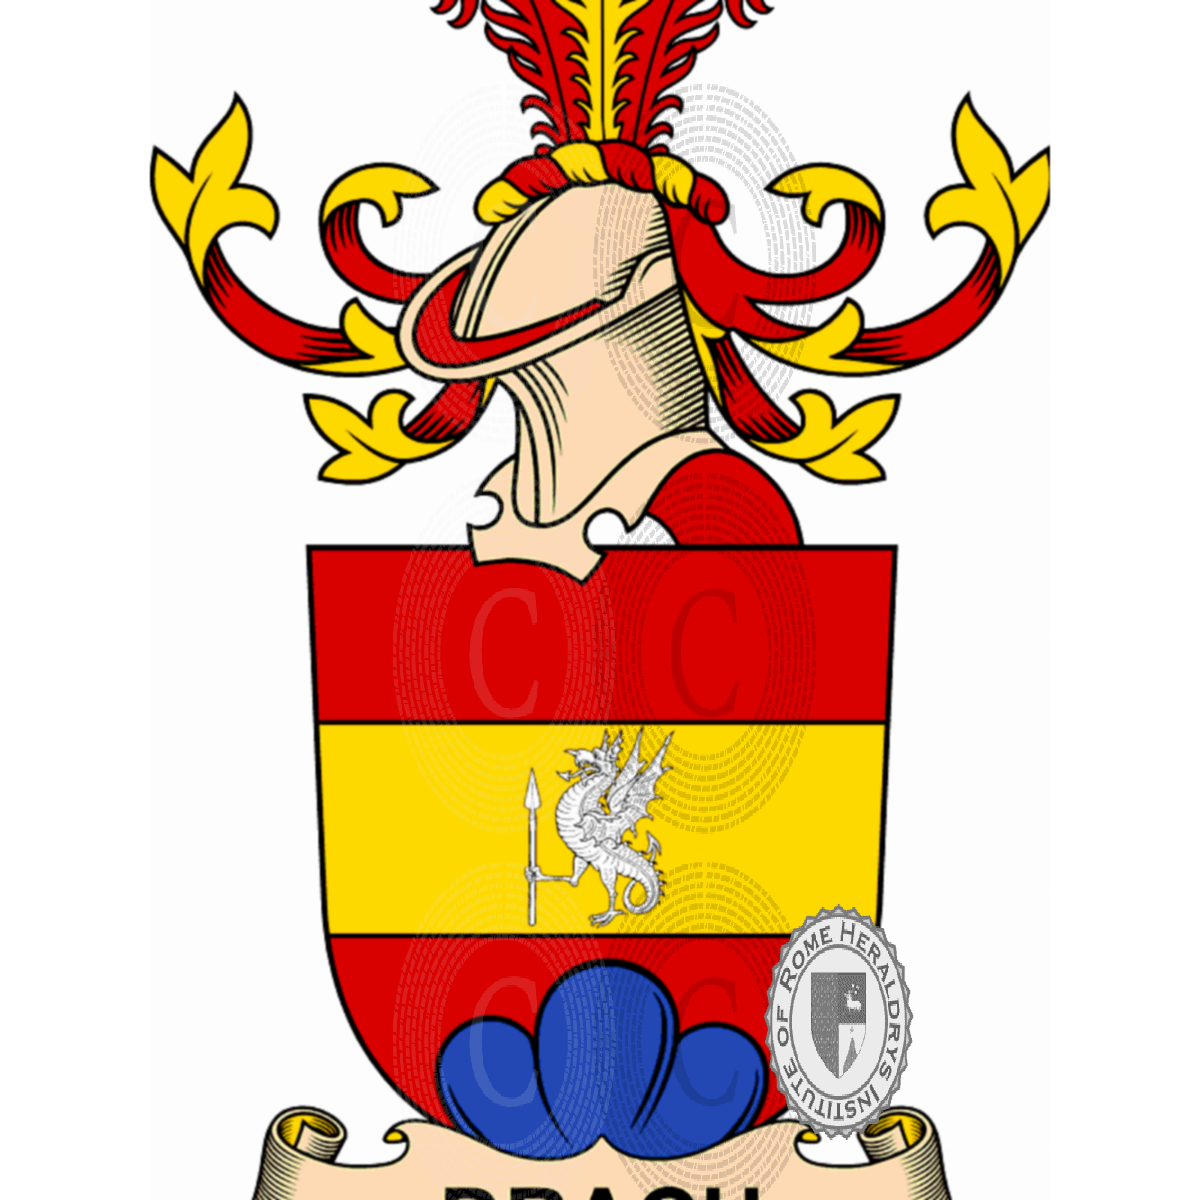 Coat of arms of familyDrach